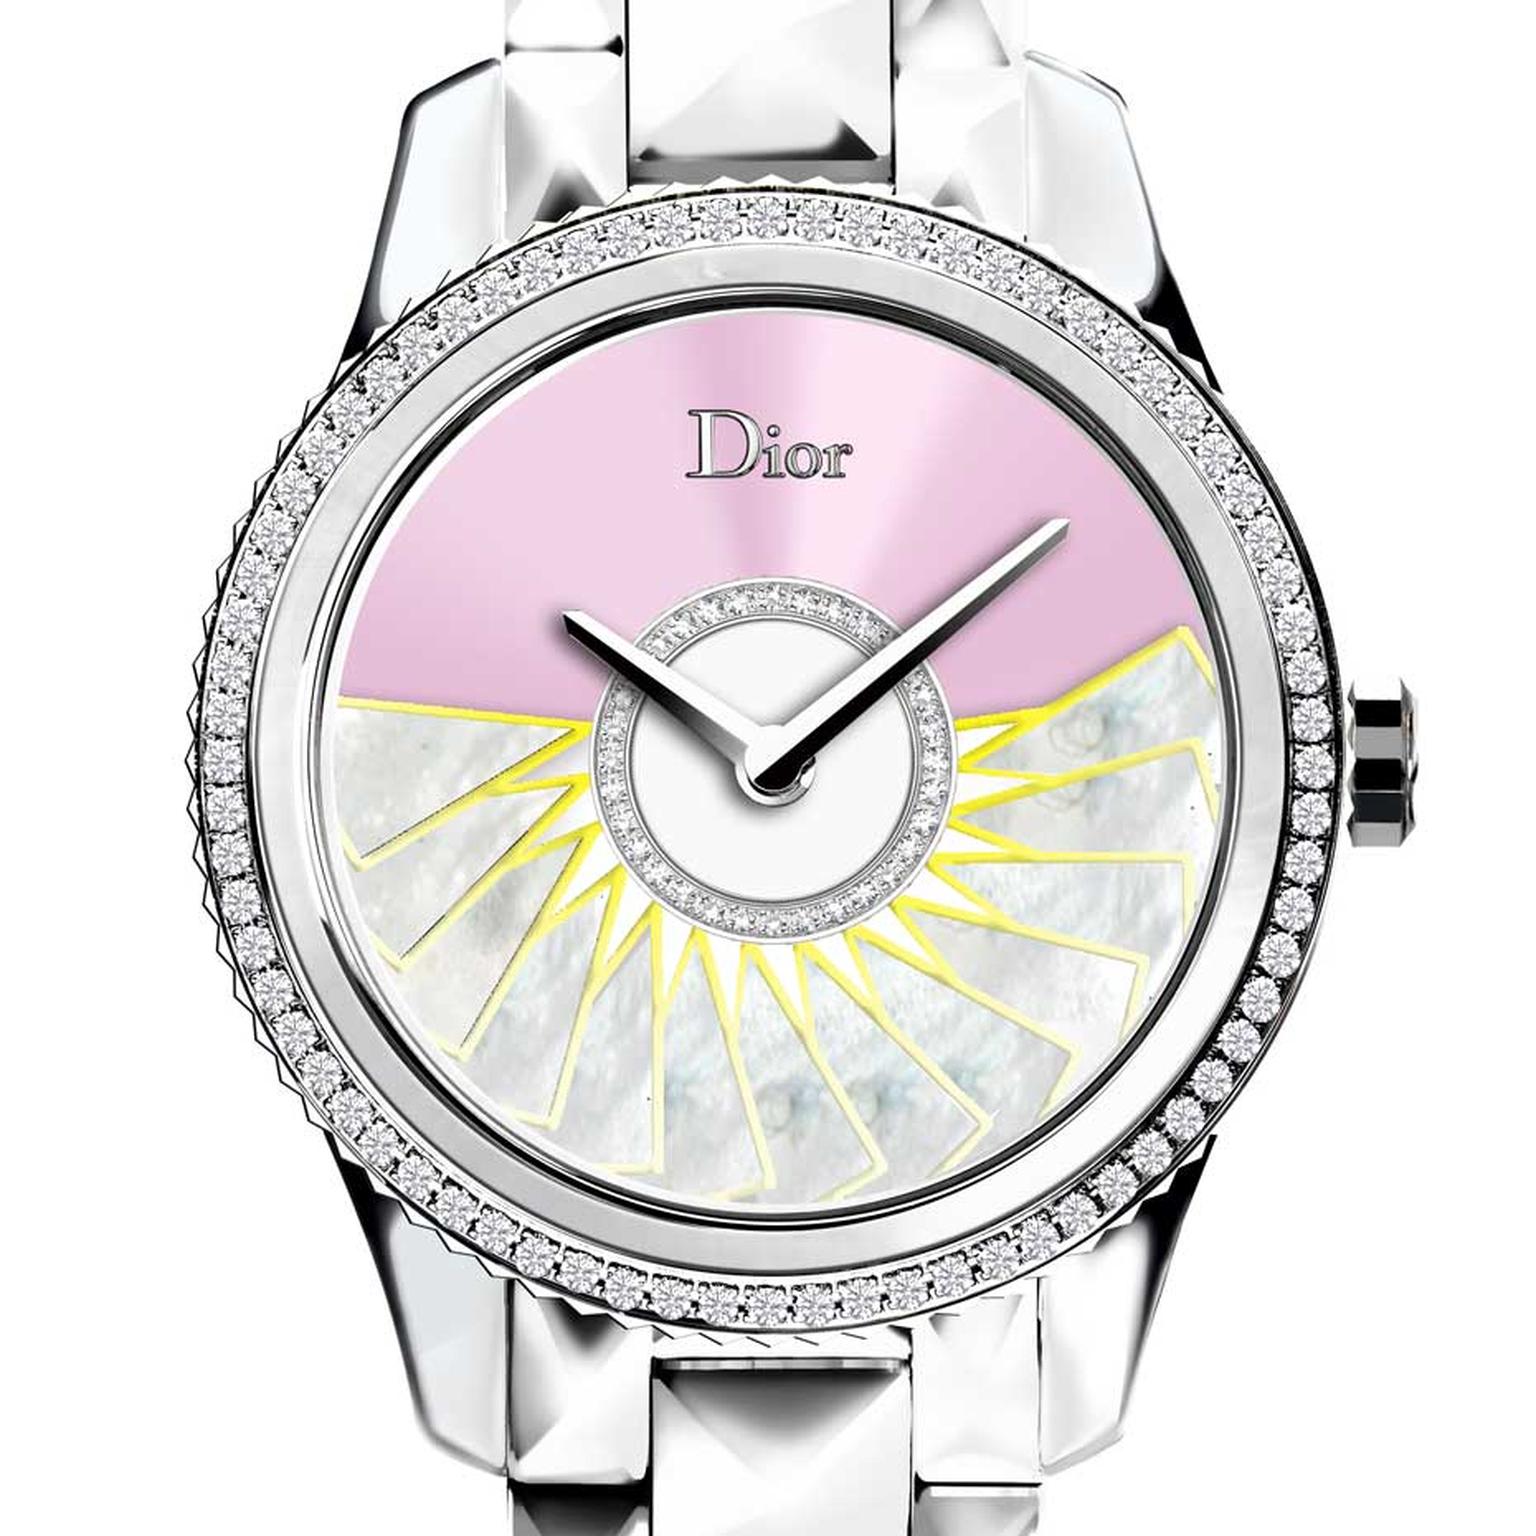 The oscillating weight on the pink Dior VIII Grand Bal Plissé Soleil watch is decorated with white mother-of-pearl marquetry, finished with yellow hems and set with diamonds.